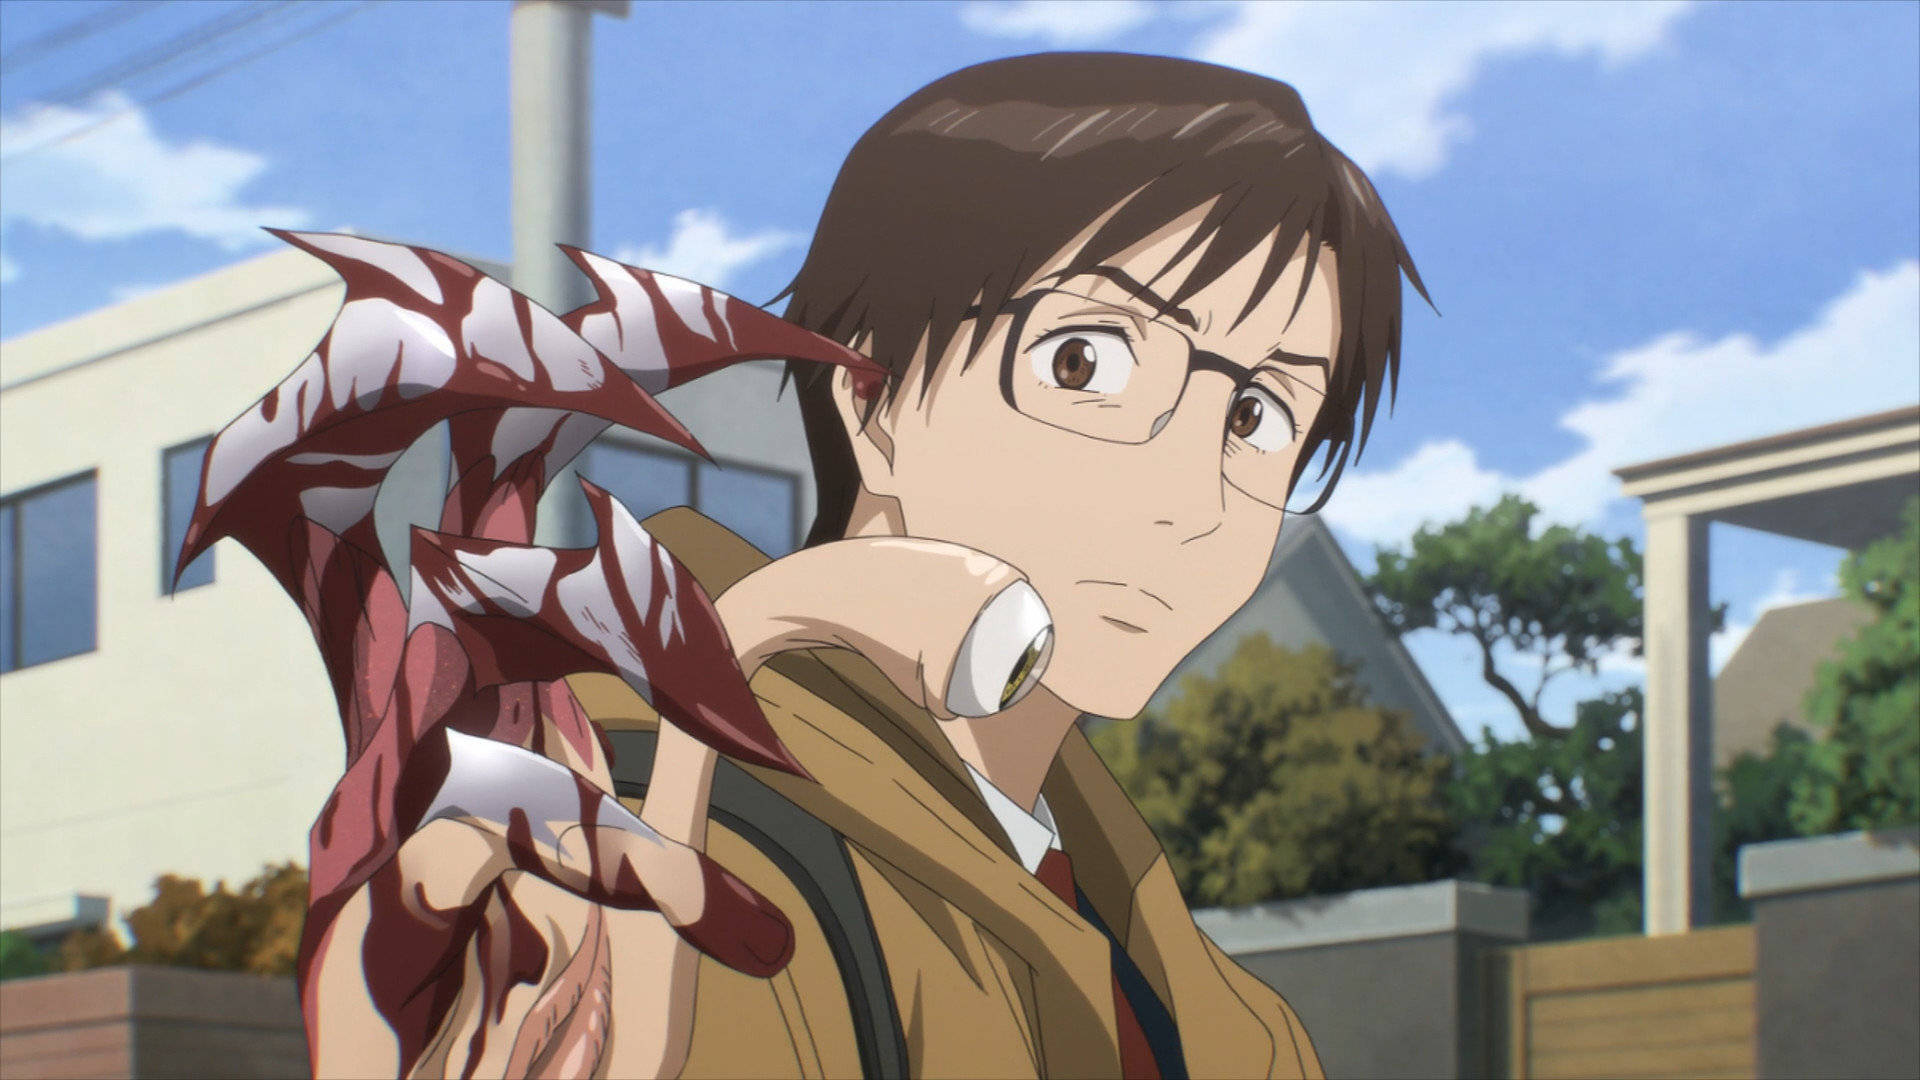 Free Parasyte Wallpaper Downloads, [100+] Parasyte Wallpapers for FREE |  